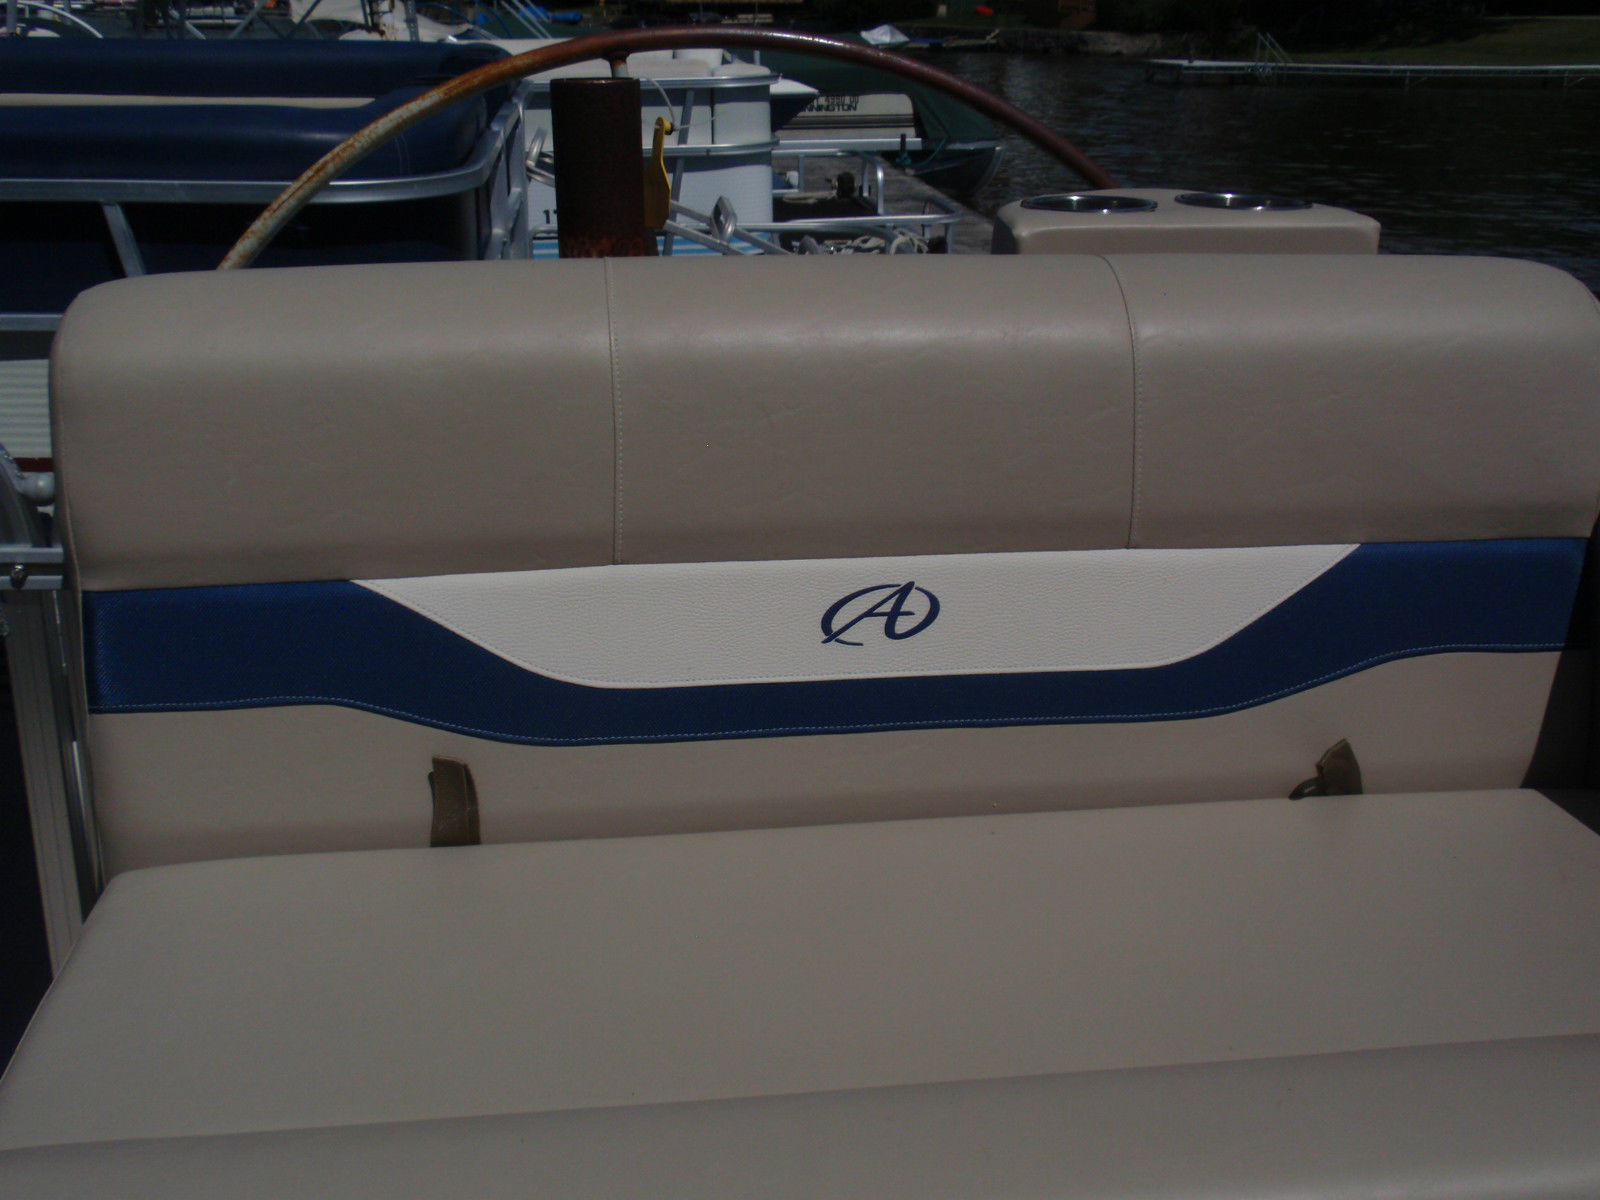 Avalon GS 1680CR 2013 for sale for $14,995 - Boats-from 